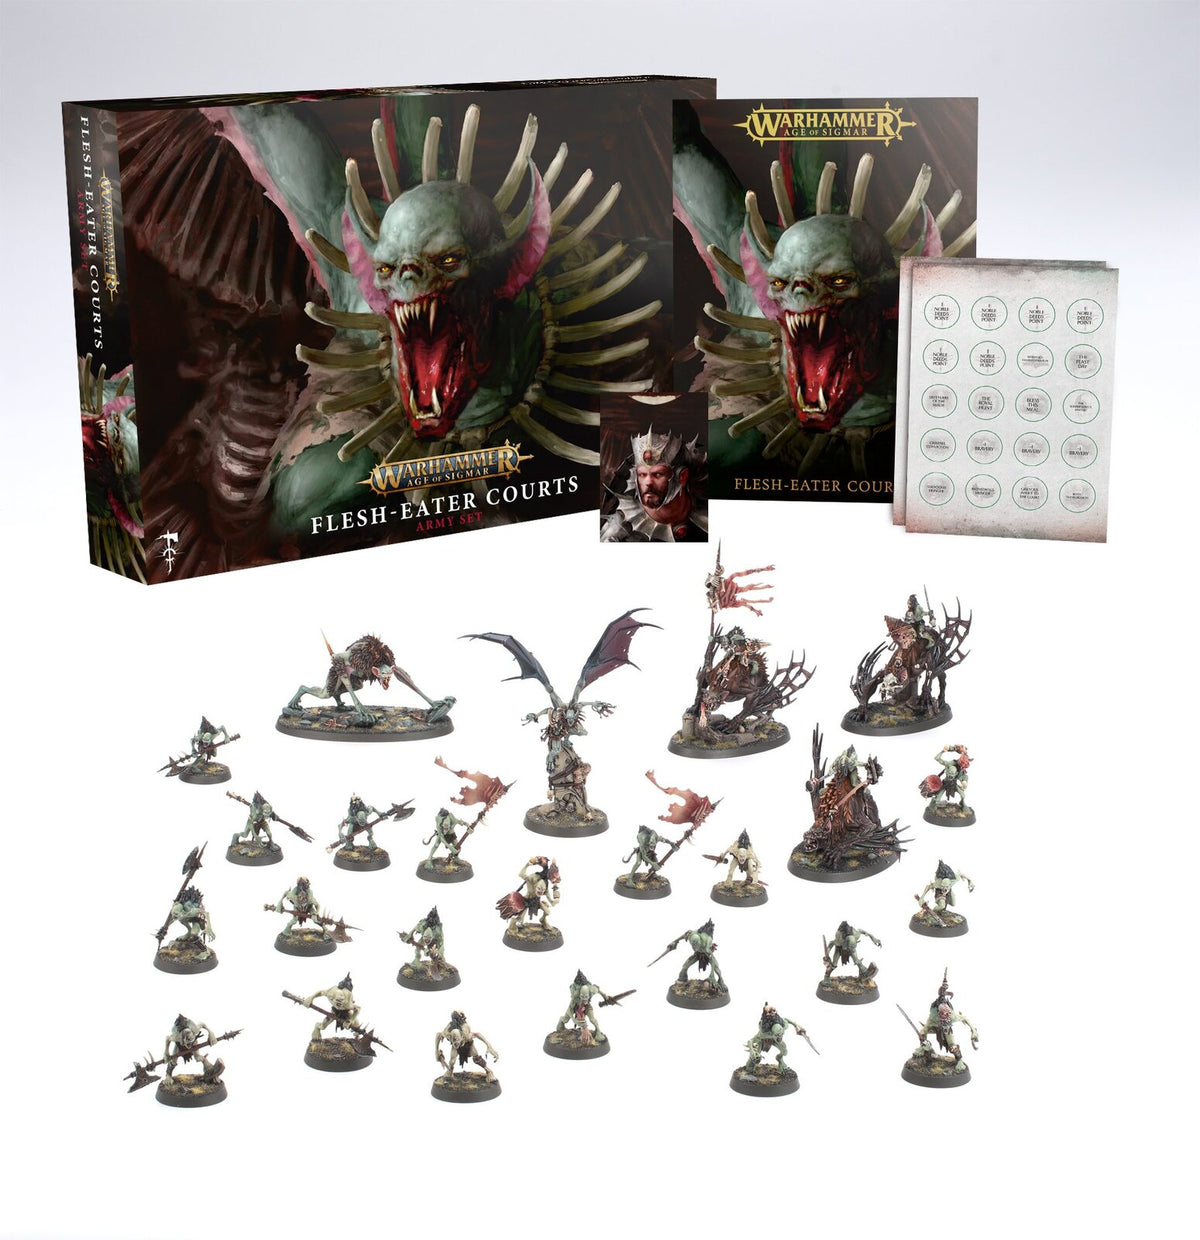 Flesh-eater Courts Army Set (91-44)